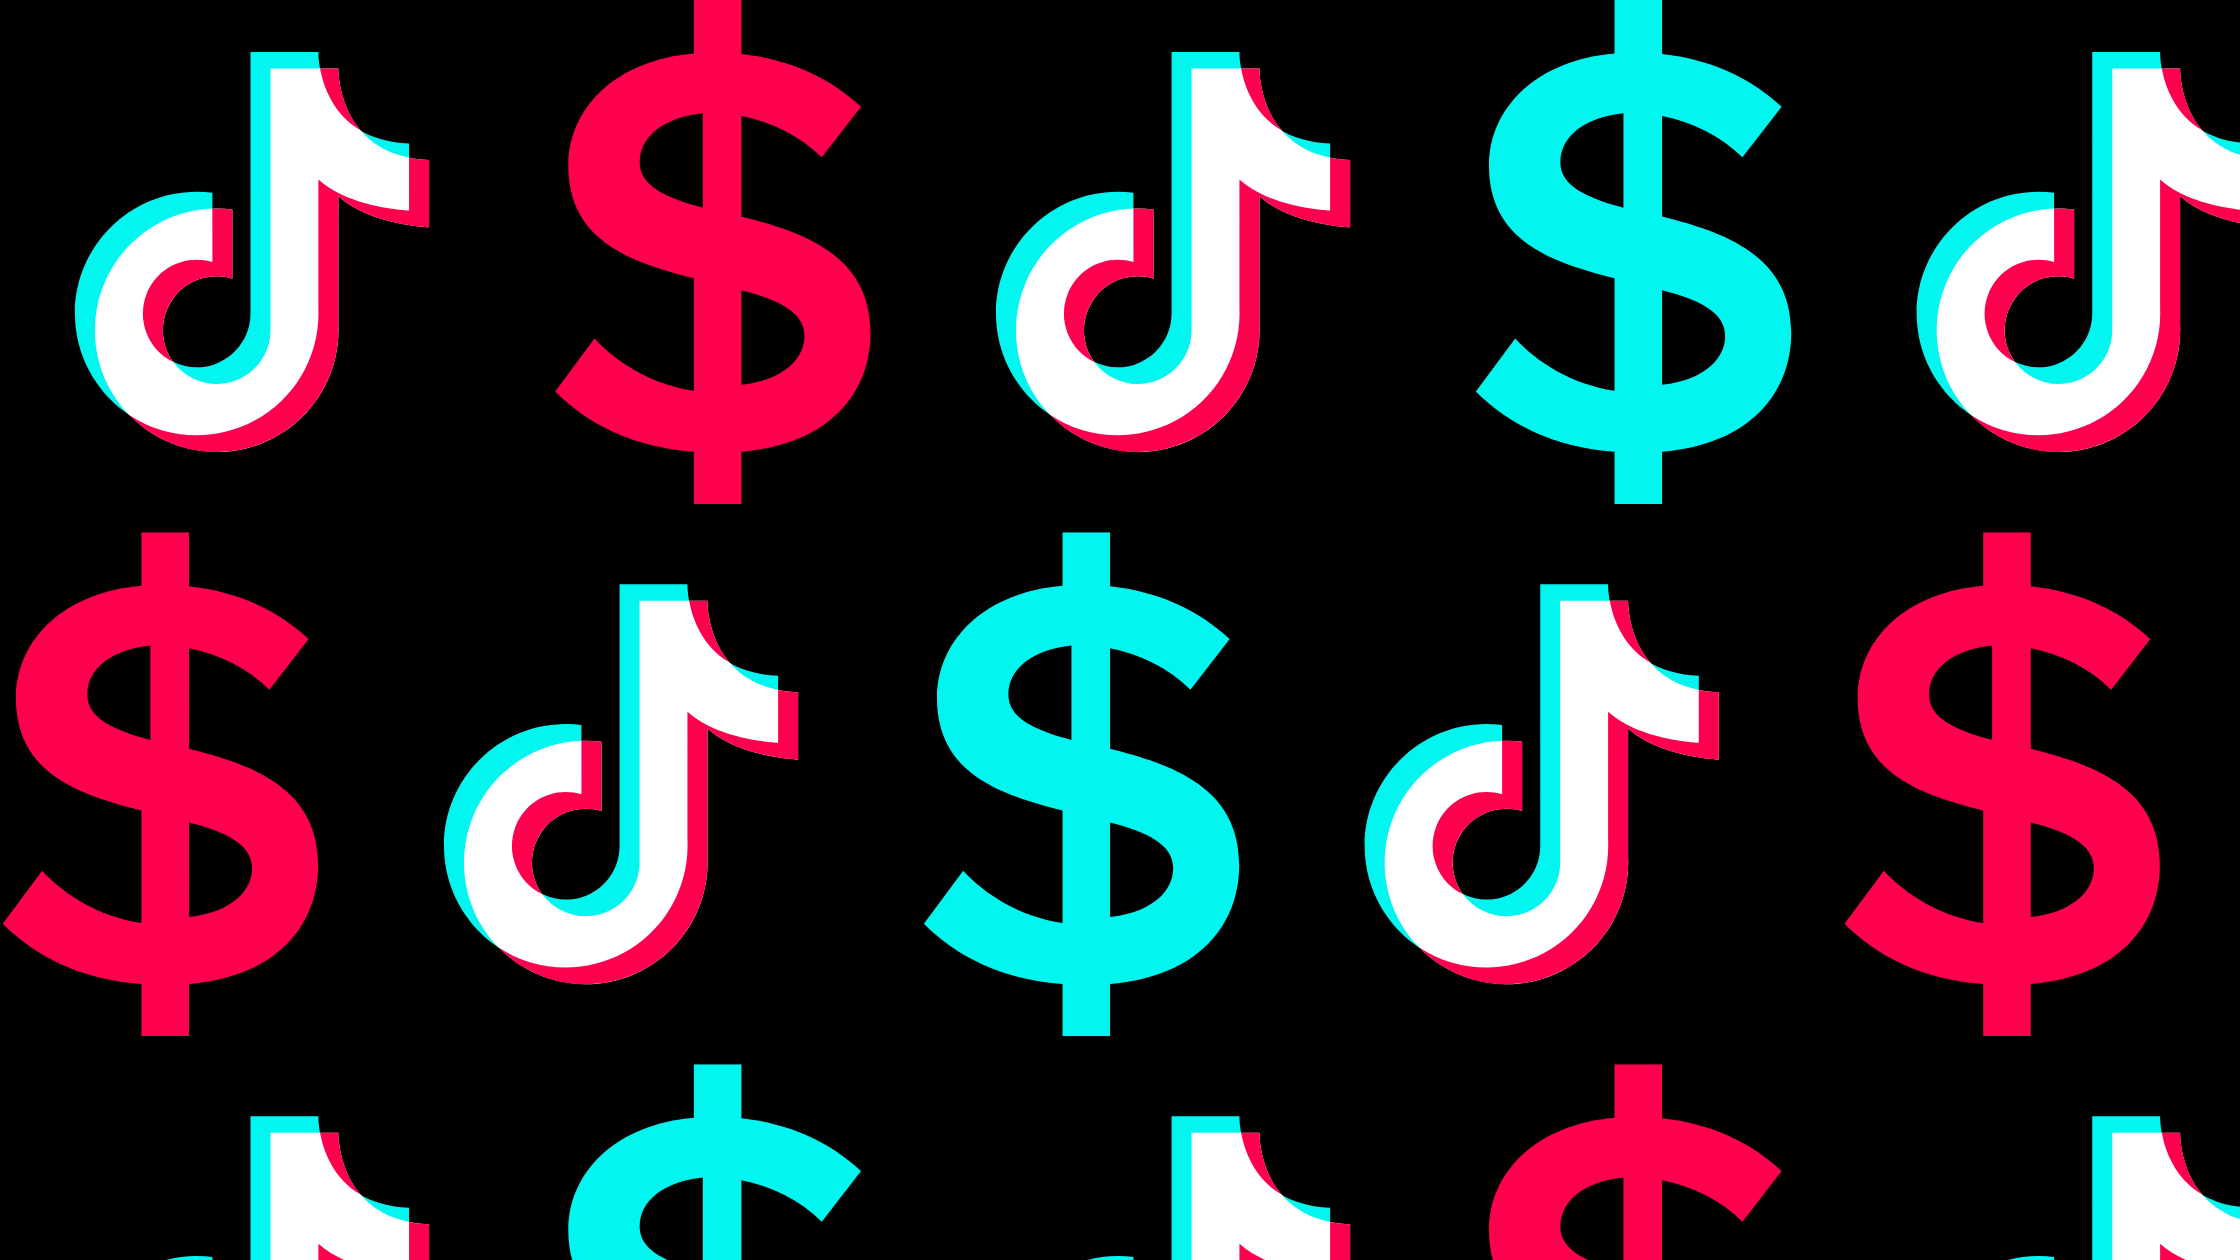 The TikTok logo and a dollar sign in a repeating alternating pattern